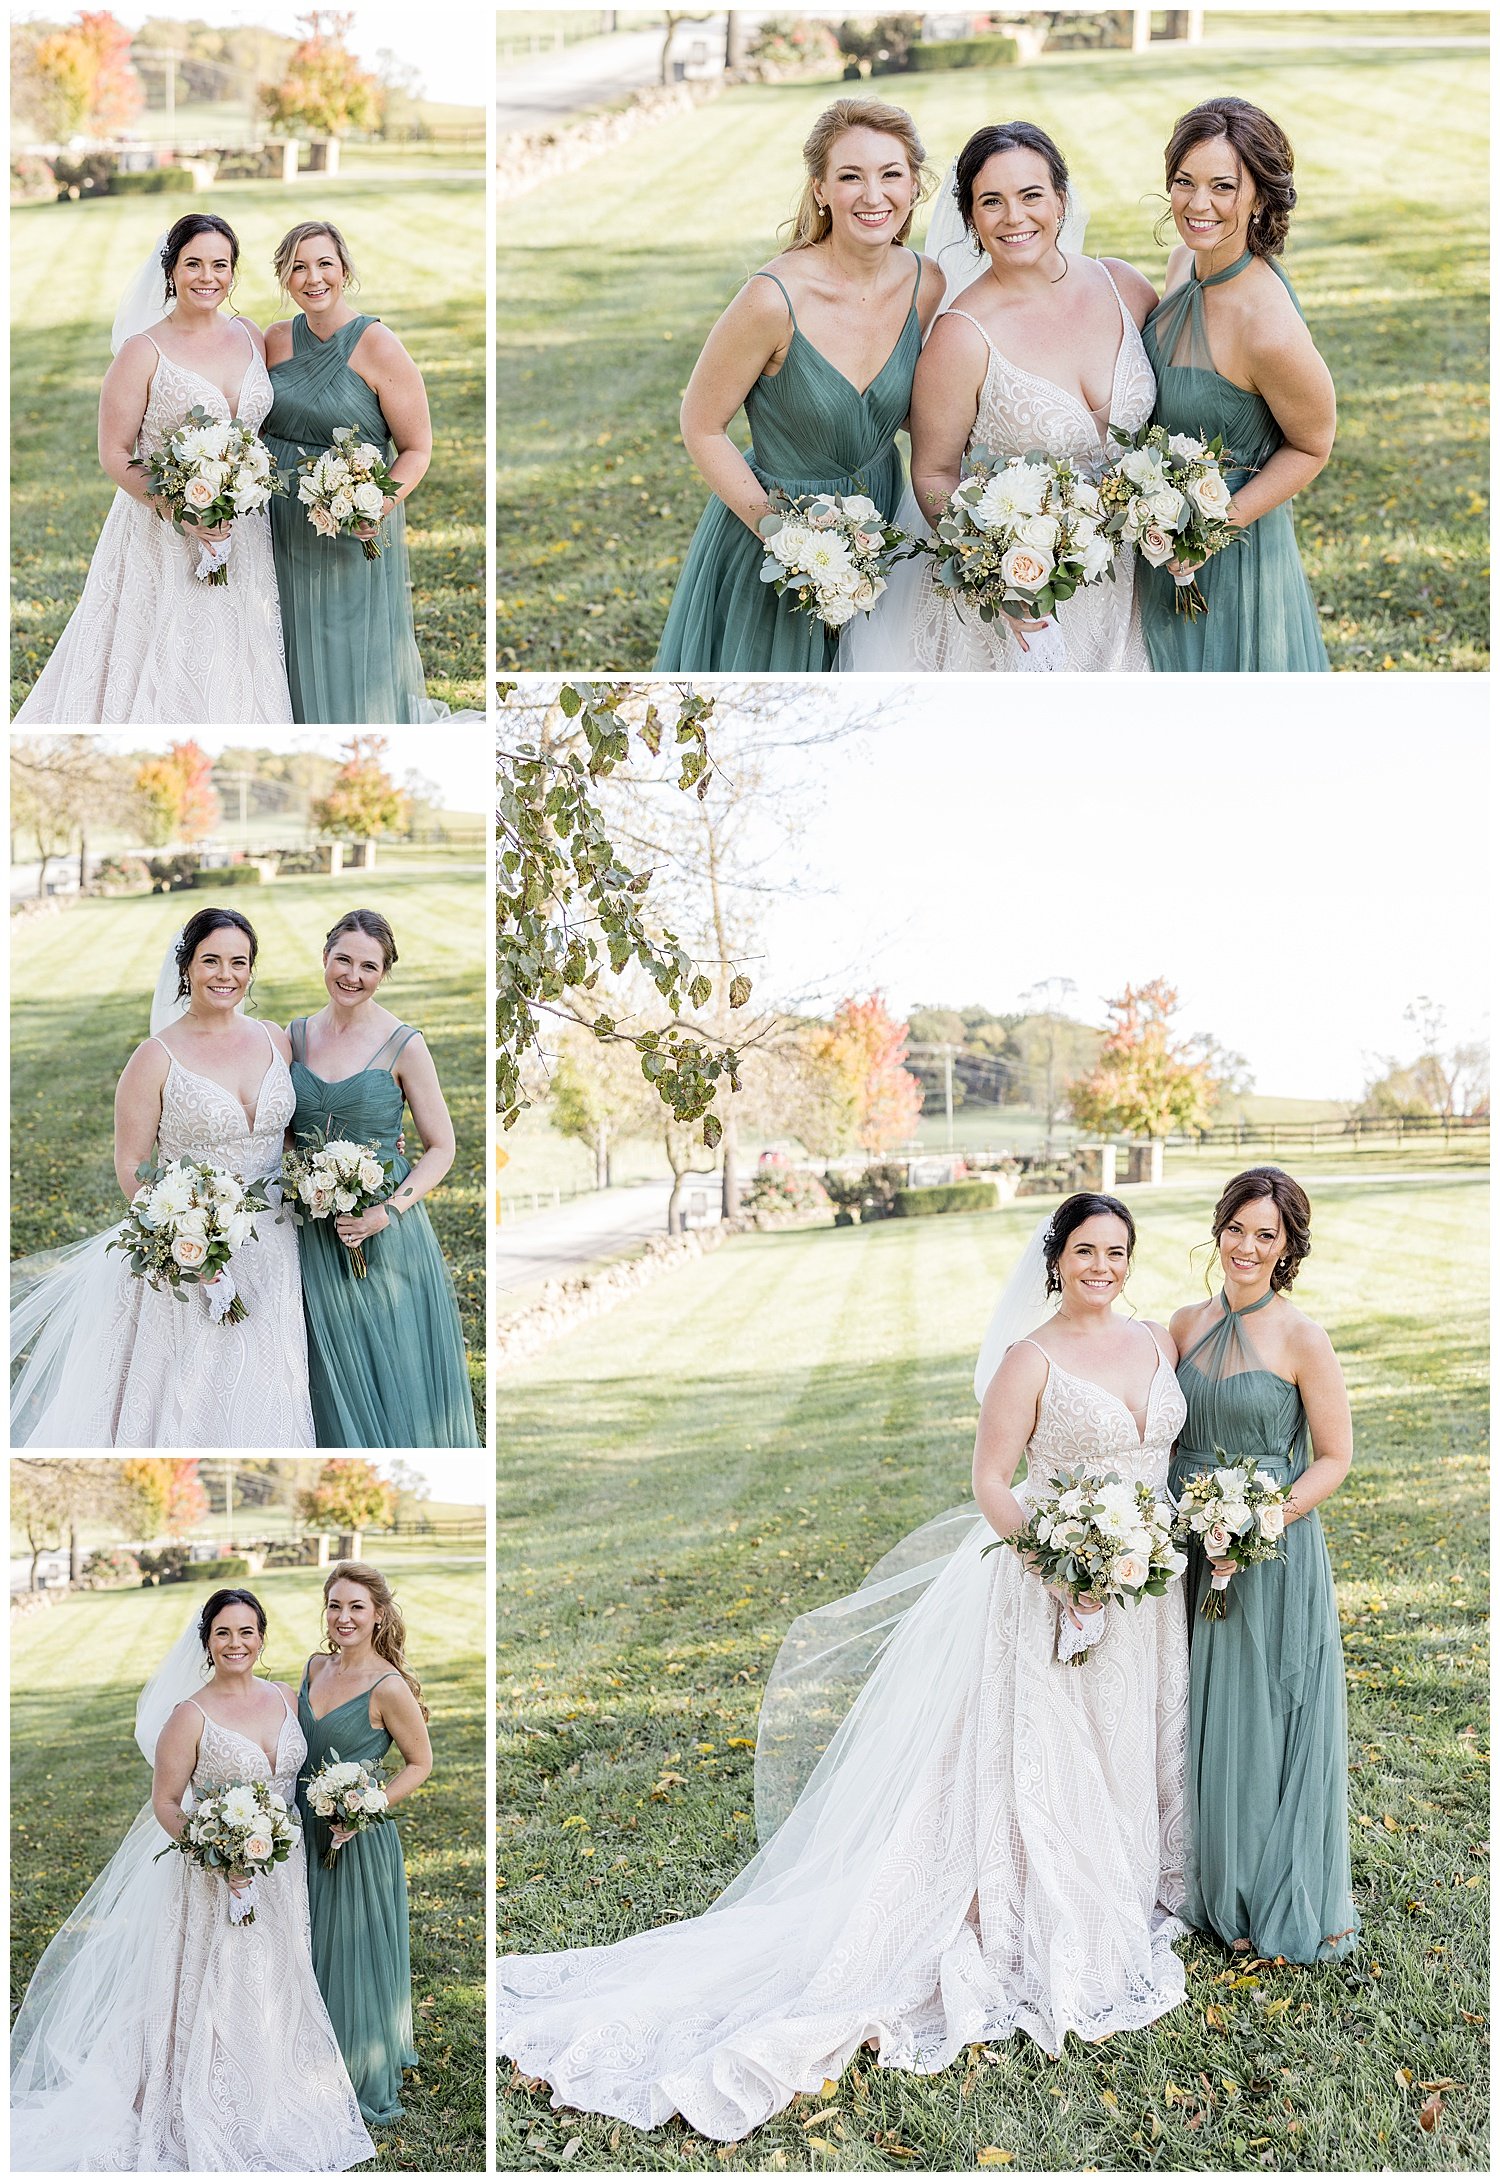 Steph Rick Married Stone Tower Winery Wedding Living Radiant Photography Blog_0030.jpg